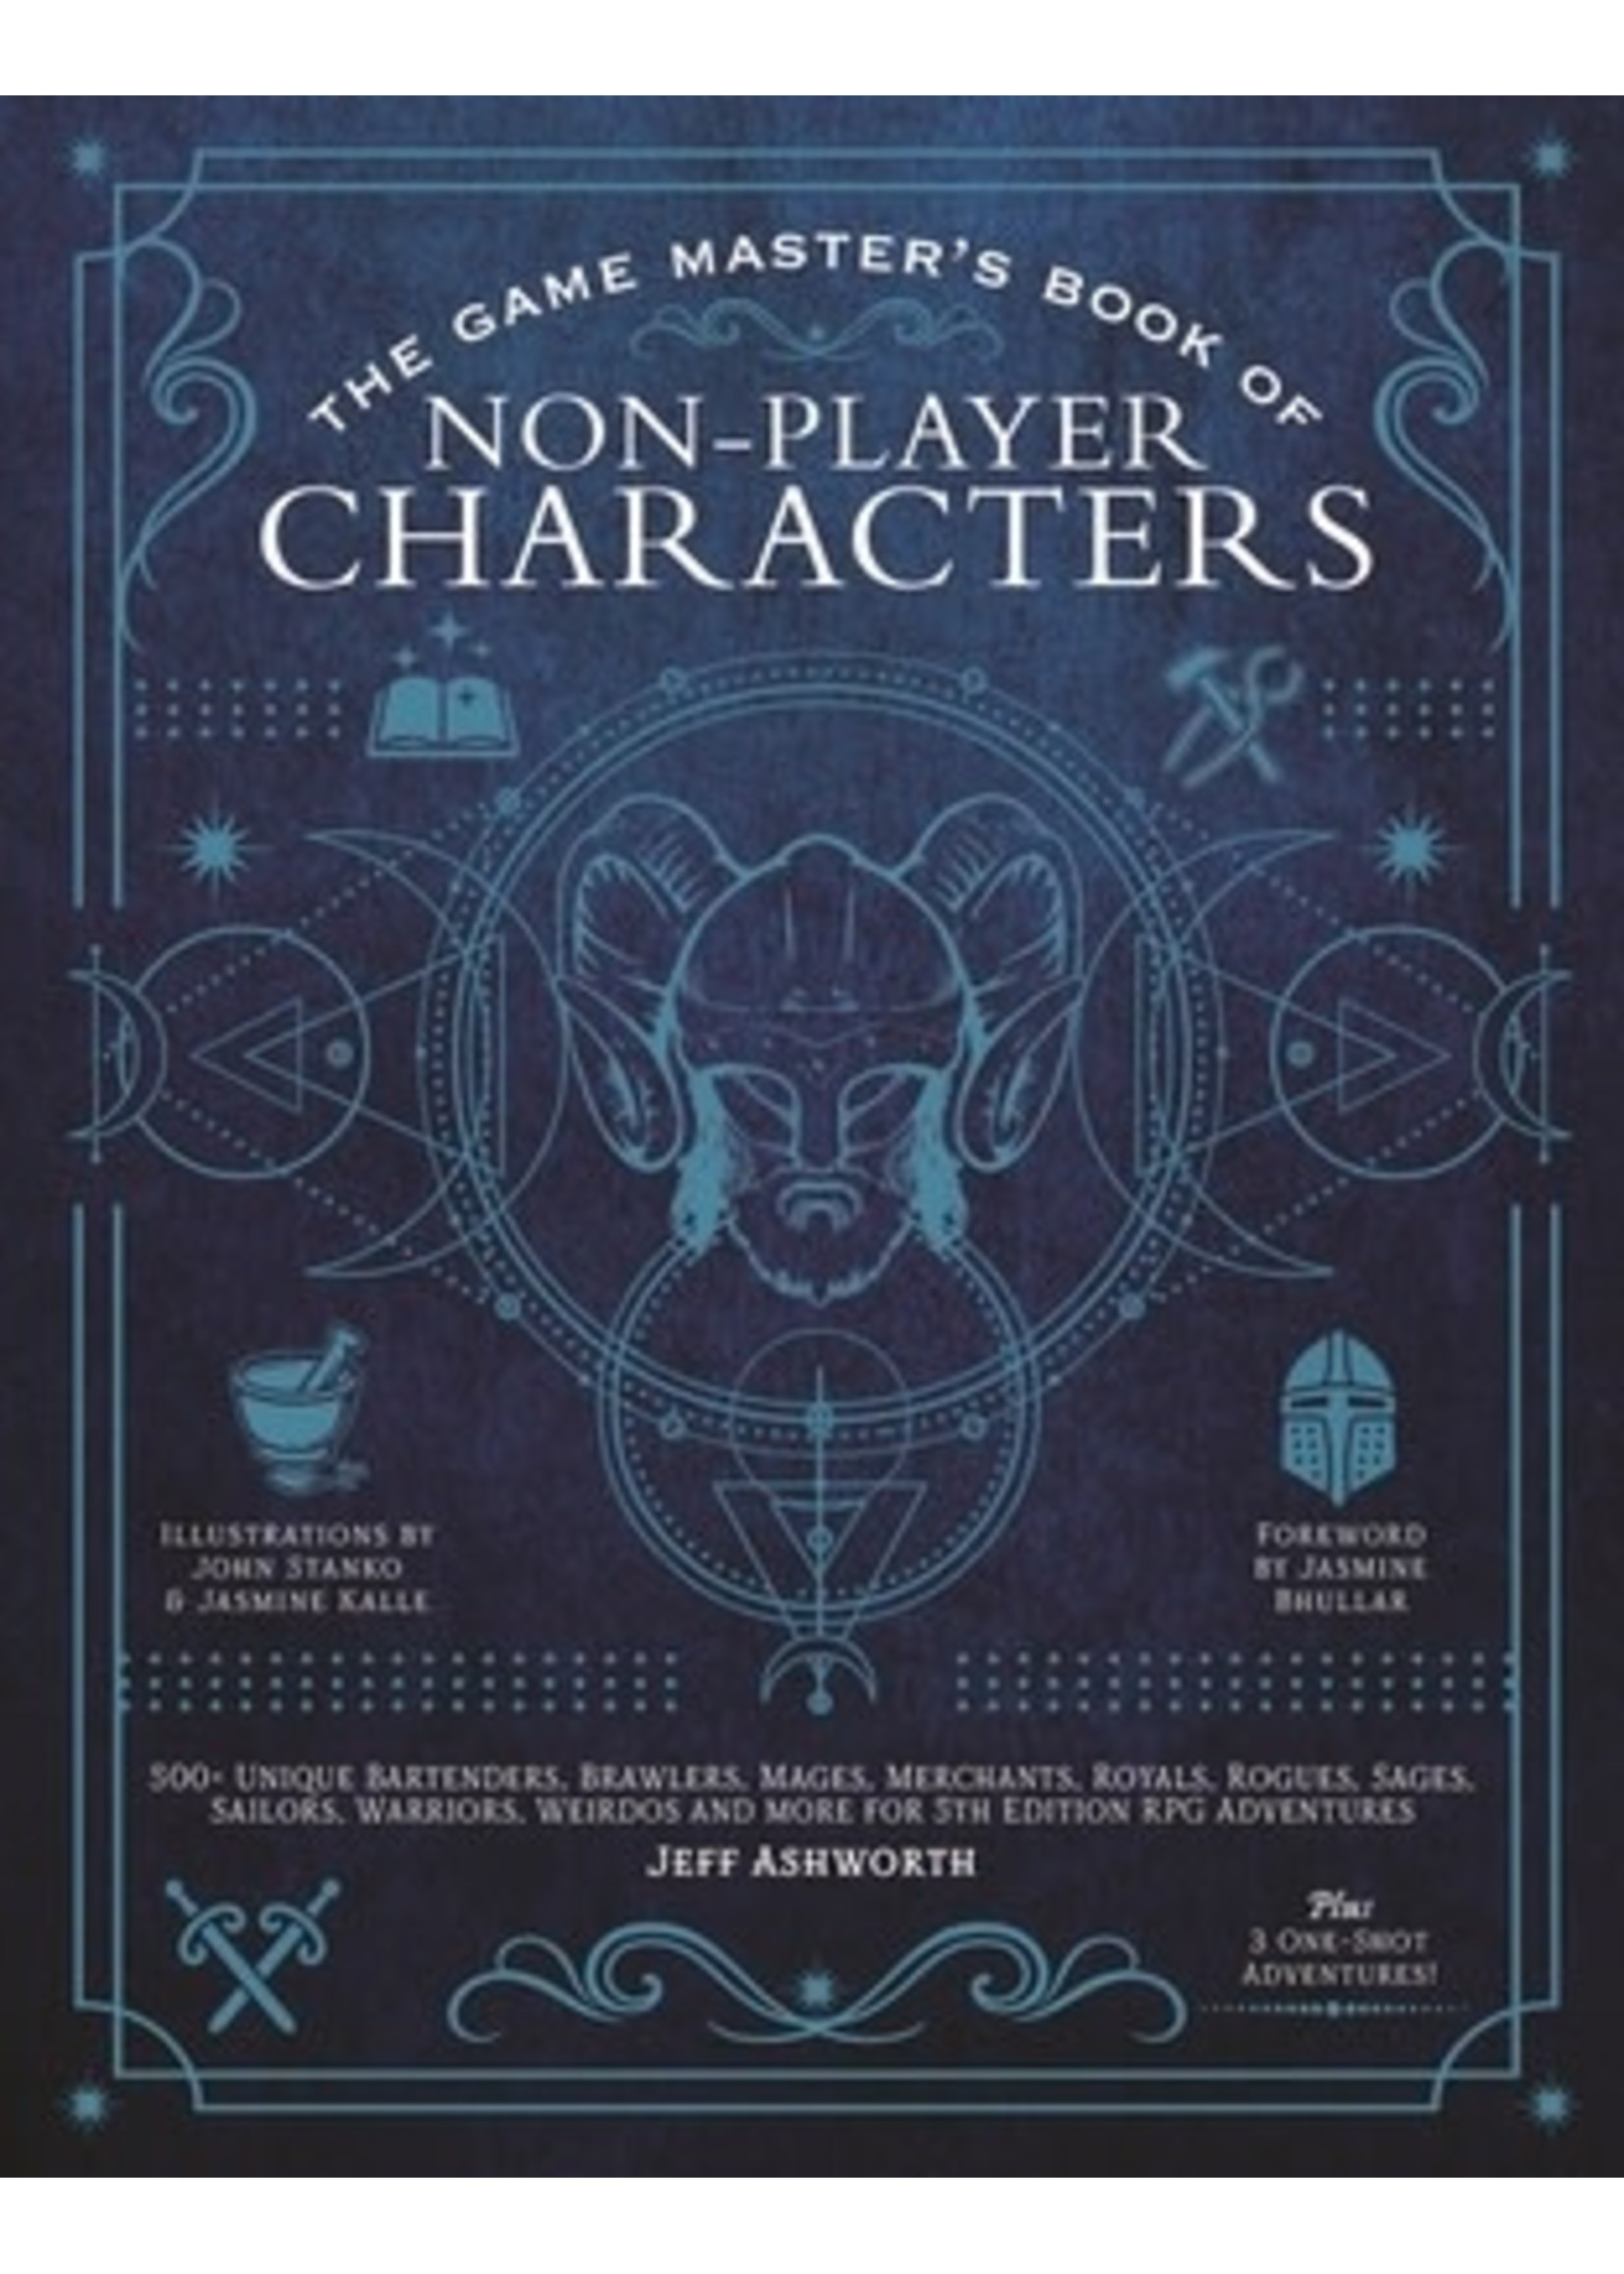 The Game Master's Book of Non-Player Characters: 500+ unique bartenders, brawlers, mages, merchants, royals, rogues, sages, sailors, warriors, weirdos and more for 5th edition RPG adventures by Jeff Ashworth,  Jasmine Kalle,  John Stanko